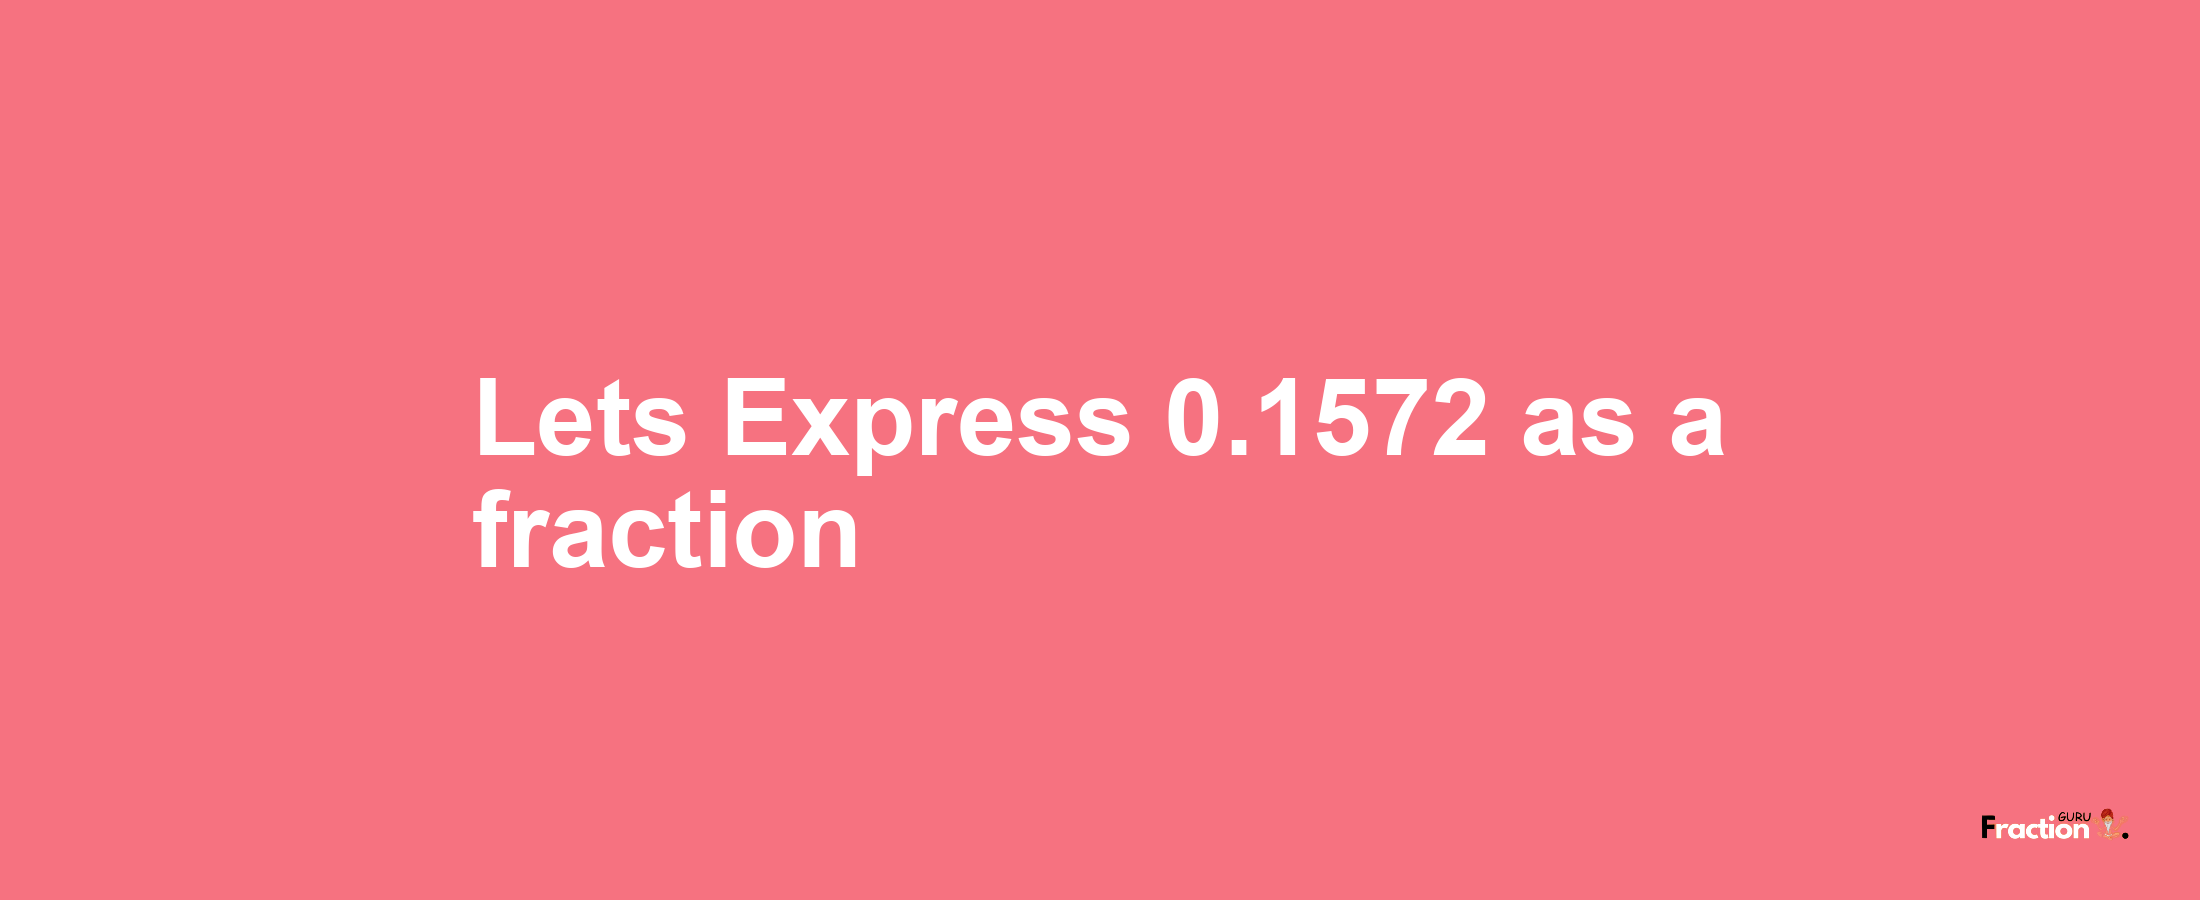 Lets Express 0.1572 as afraction